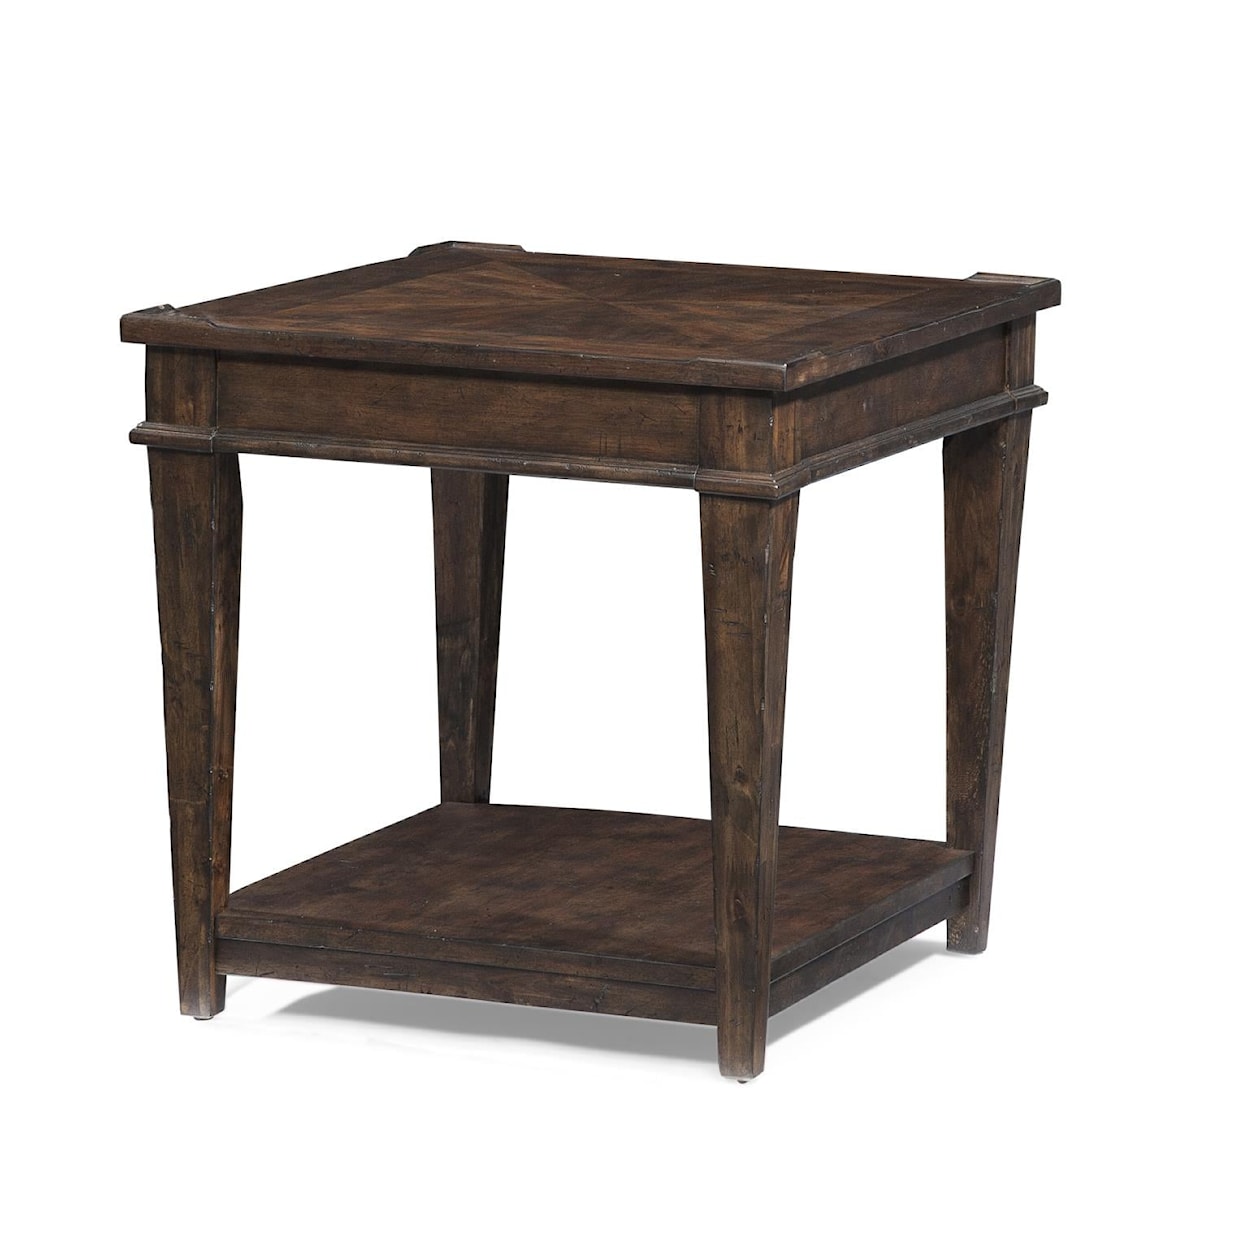 Trisha Yearwood Home Collection by Legacy Classic Trisha Yearwood Home Azalea End Table